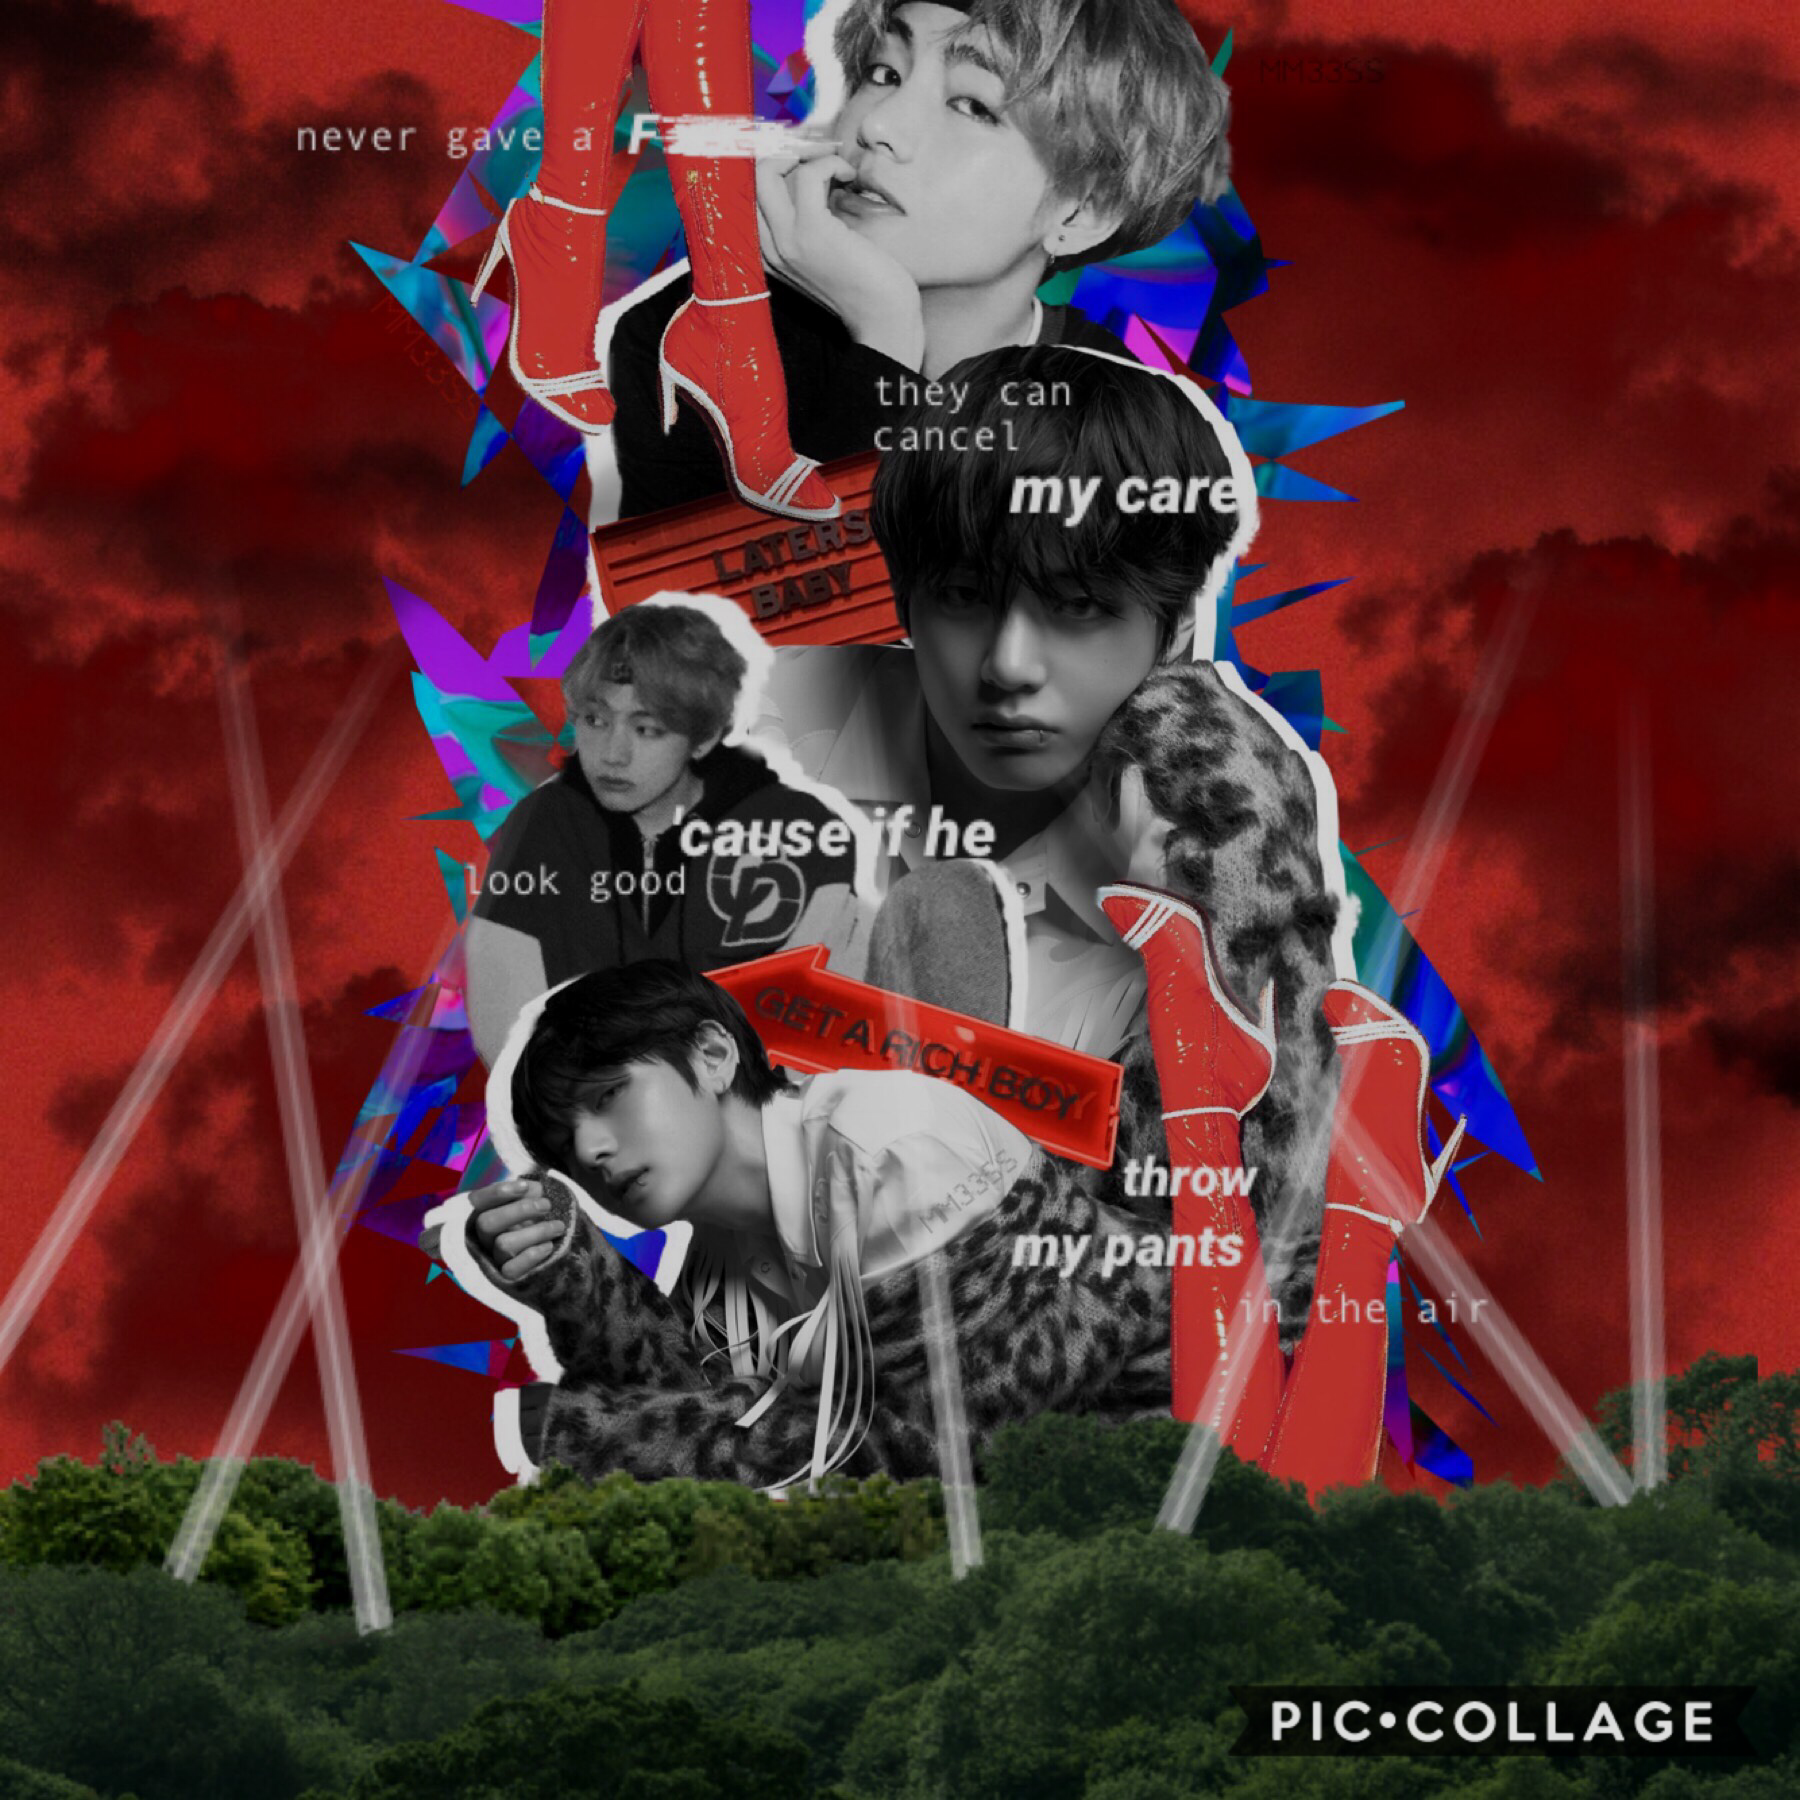 IDOL / 방탄소년단 (BTS) feat. nicki minaj / Aug. 31, 2018

(lyrics are from nicki's verse)

JHOPE IN THAT SUIT IN THE MV OMG

do yall know how hard it was to randomize those spotlights in this edit? ?? VE rYyy

image: kim taehyung (V)